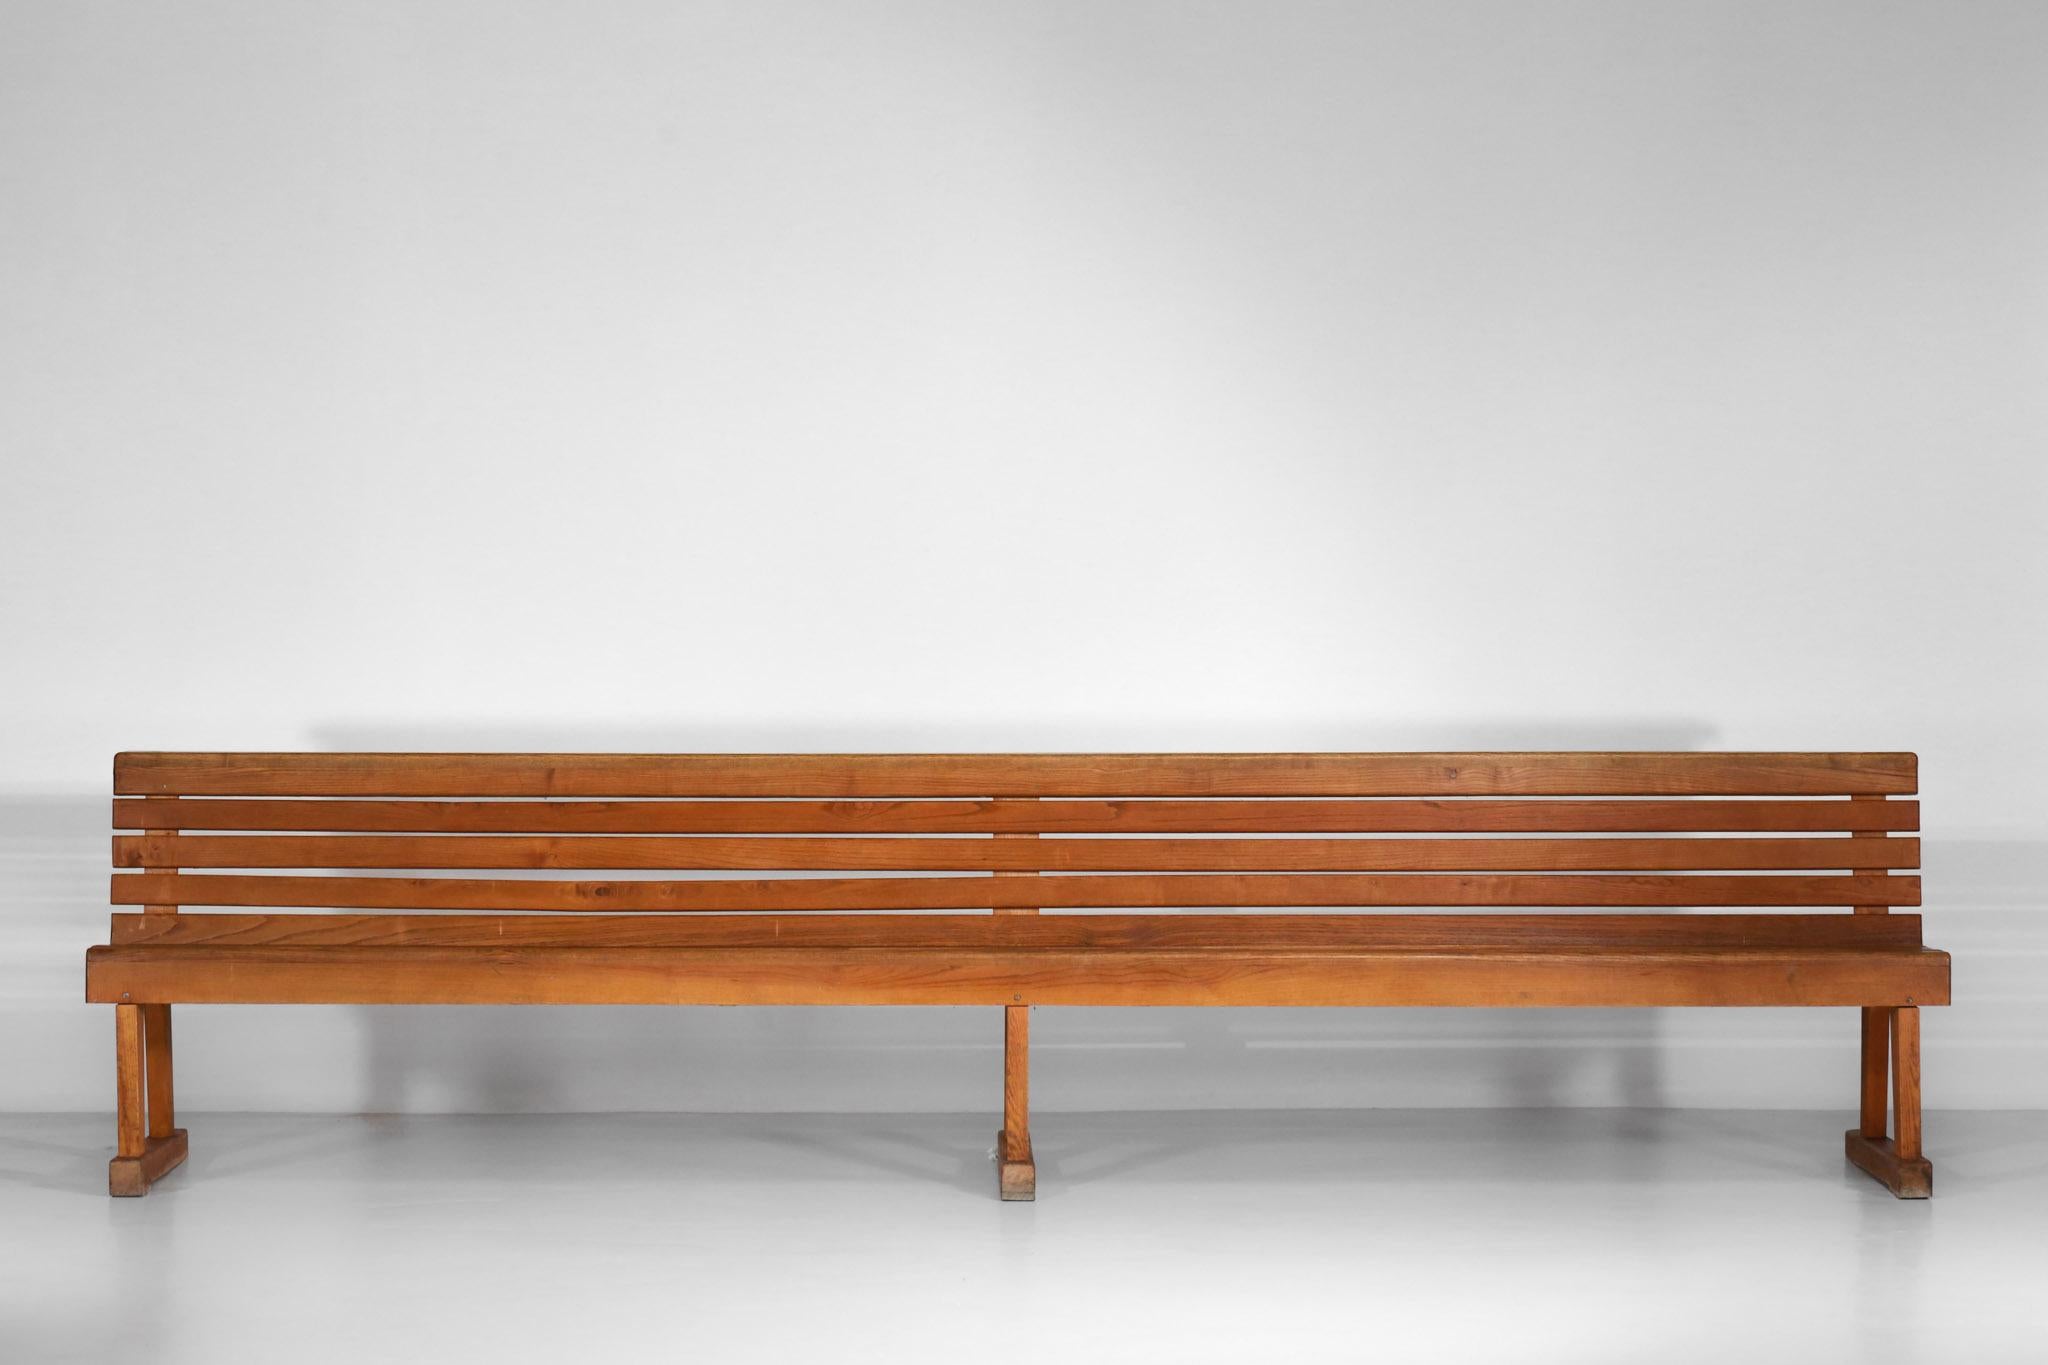 Very long benches (340 cm) from the 1950s in solid oak. French handcrafted work.